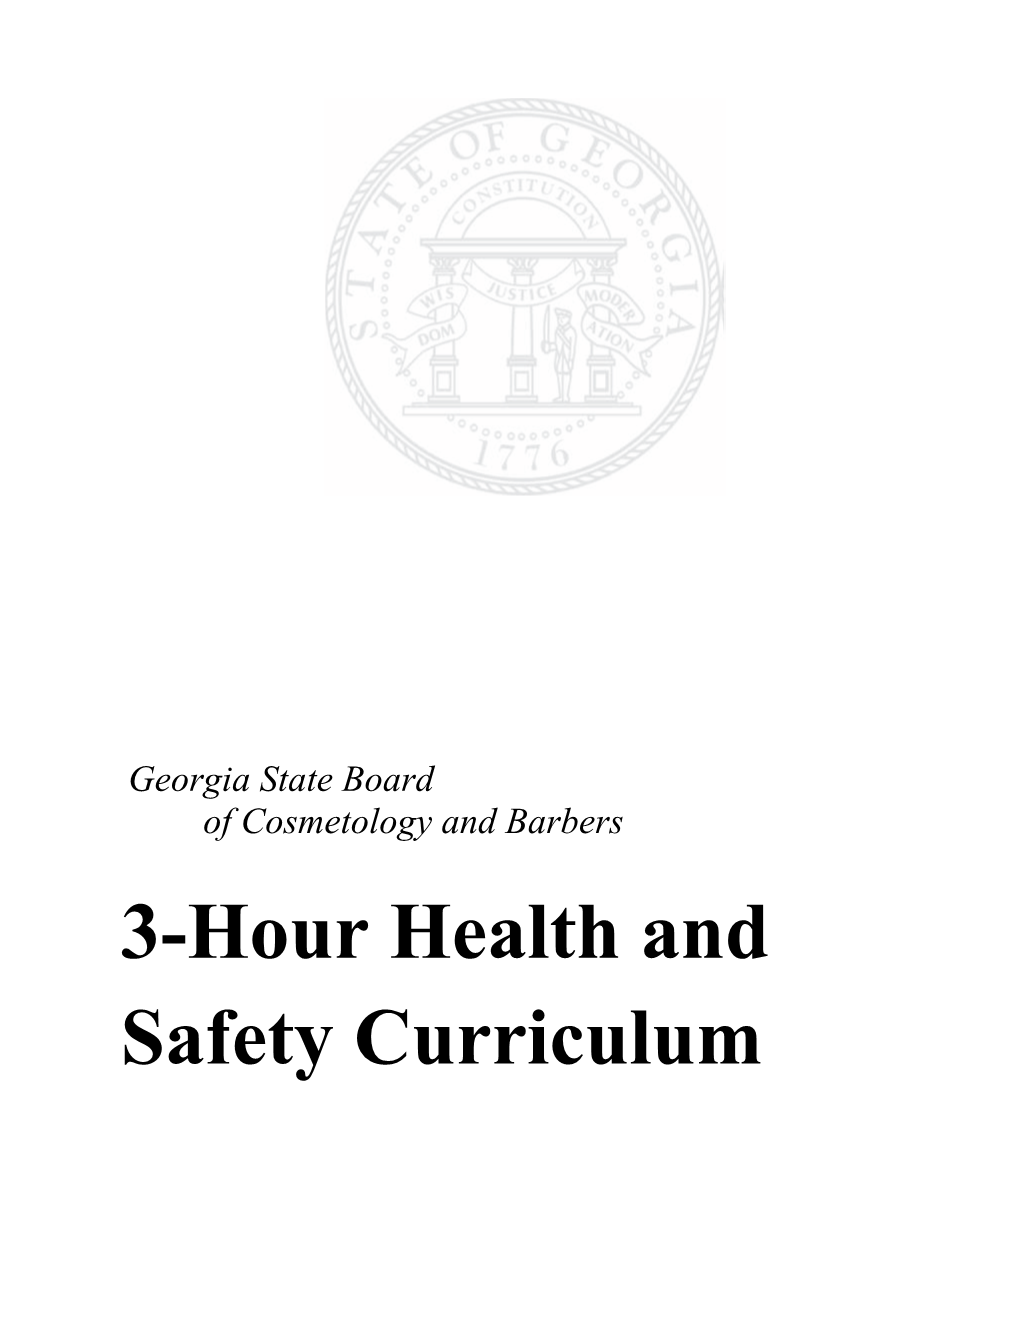 3-Hour Health and Safety Curriculum